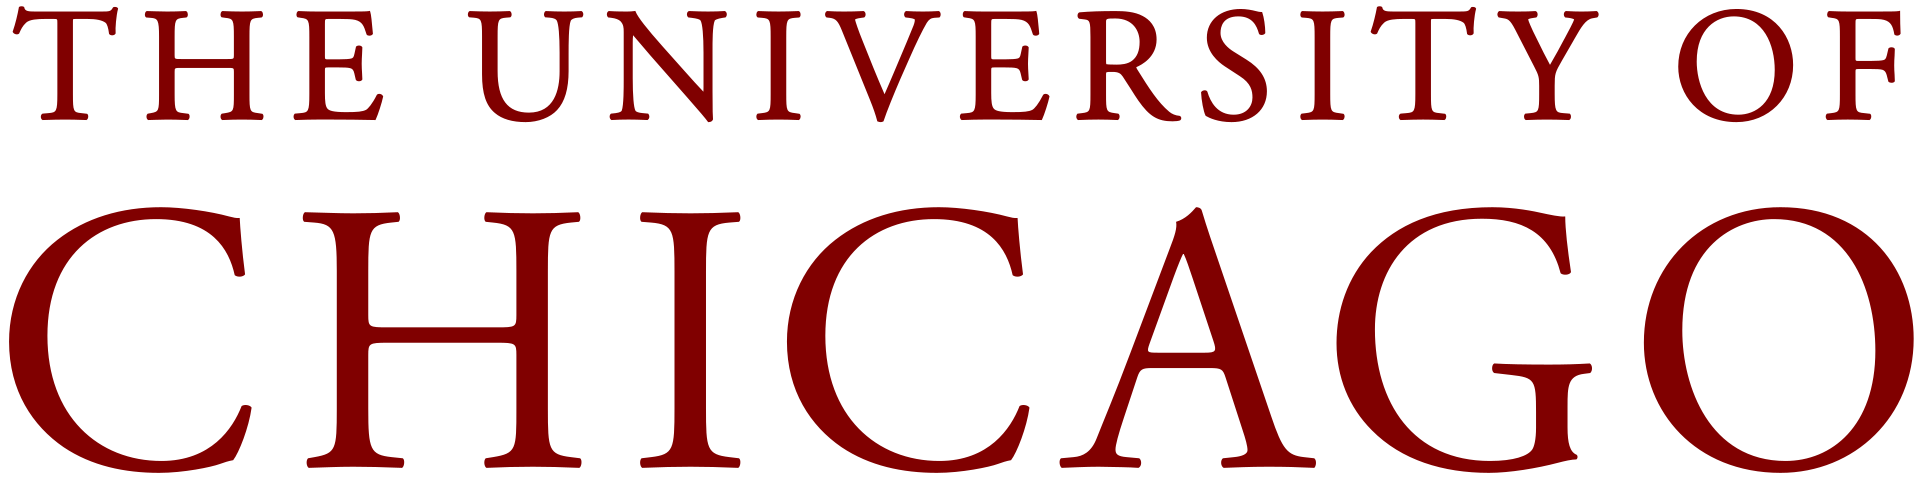 University of Chicago logo, By University of Chicago - http://communications.uchicago.edu/sites/all/files/communications/identity/uchicago.identity.guidelines.pdf, Public Domain, https://commons.wikimedia.org/w/index.php?curid=66222713